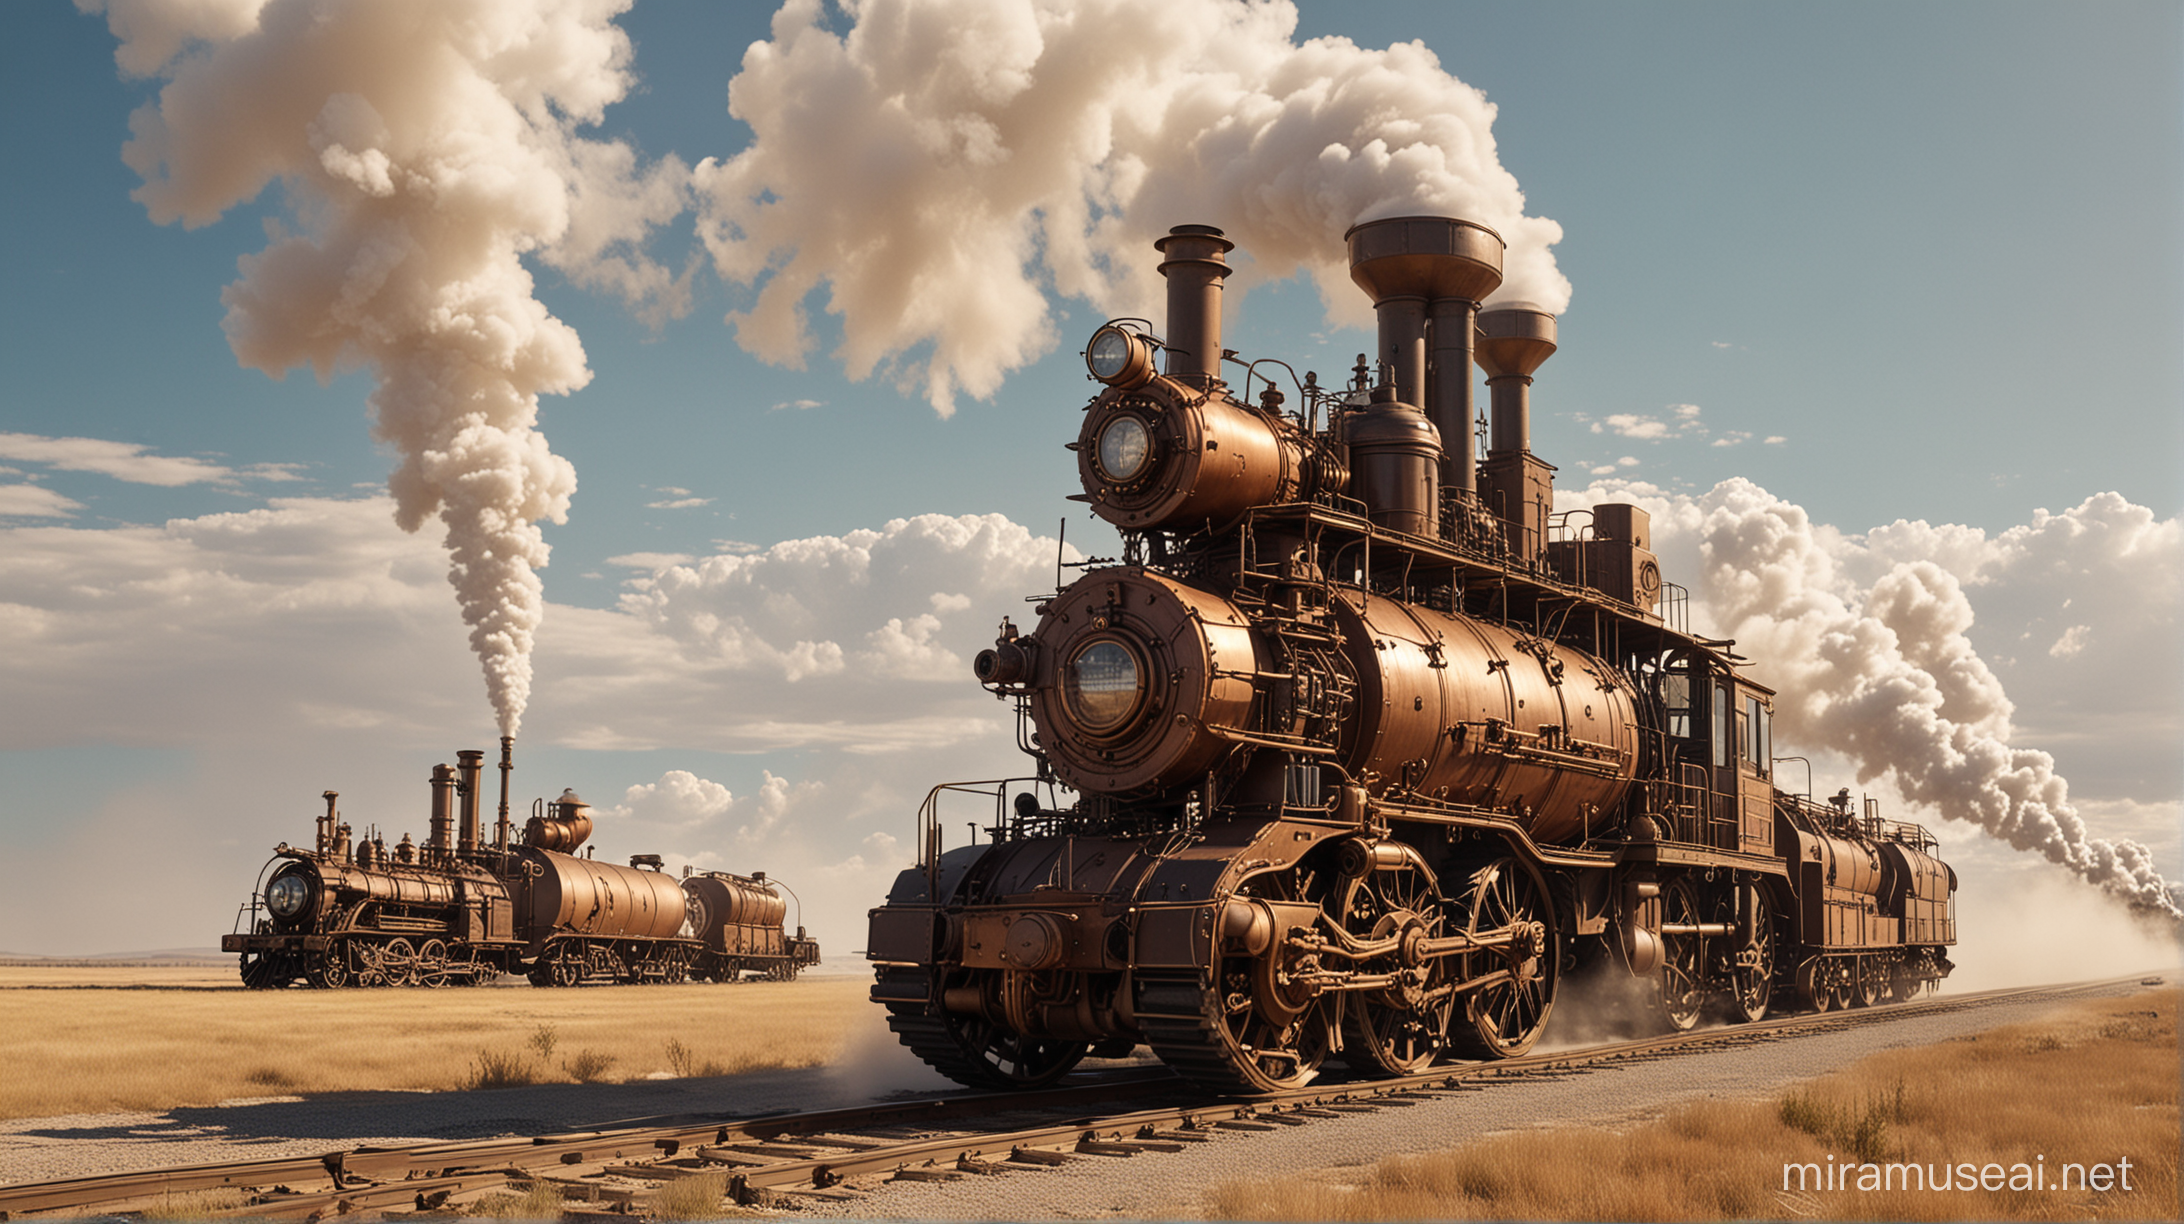 mobile steampunk colony on large caterpillar tracks moves through a prairie, large steam engines, large vertical exhaust pipes, copper, brass, glass, steam, smoke, sunny